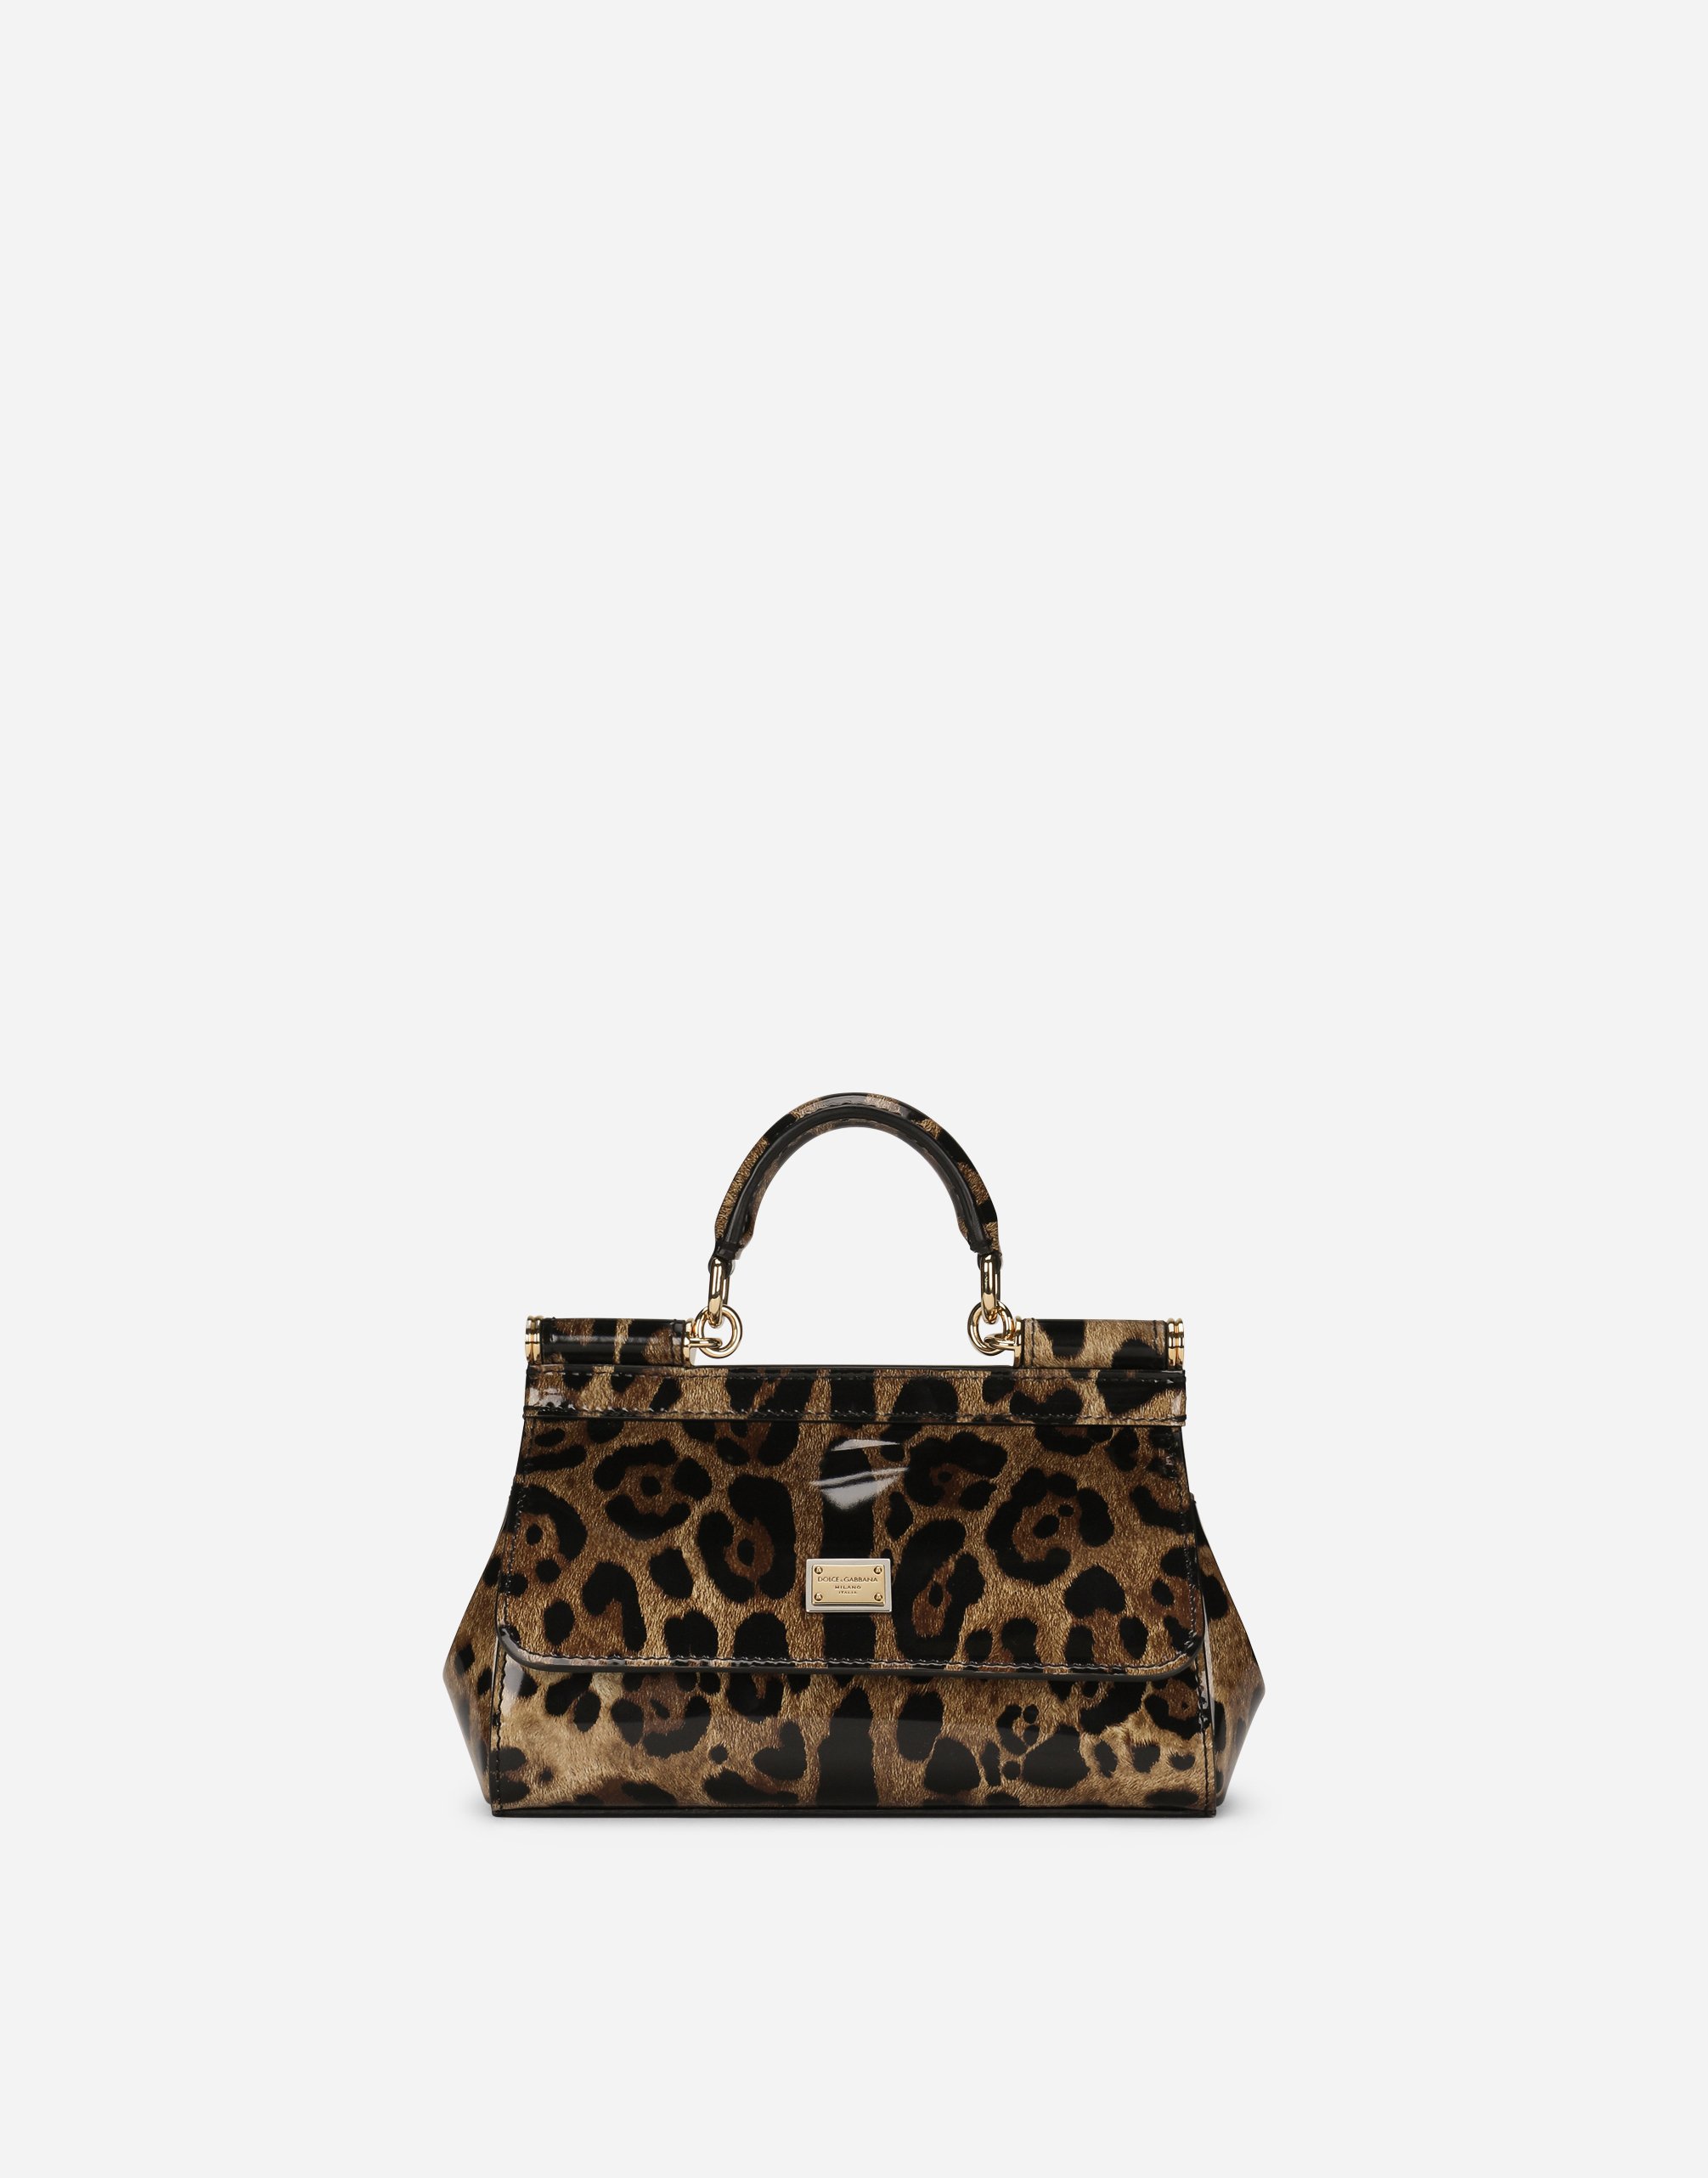 Small Sicily bag in leopard-print polished calfskin